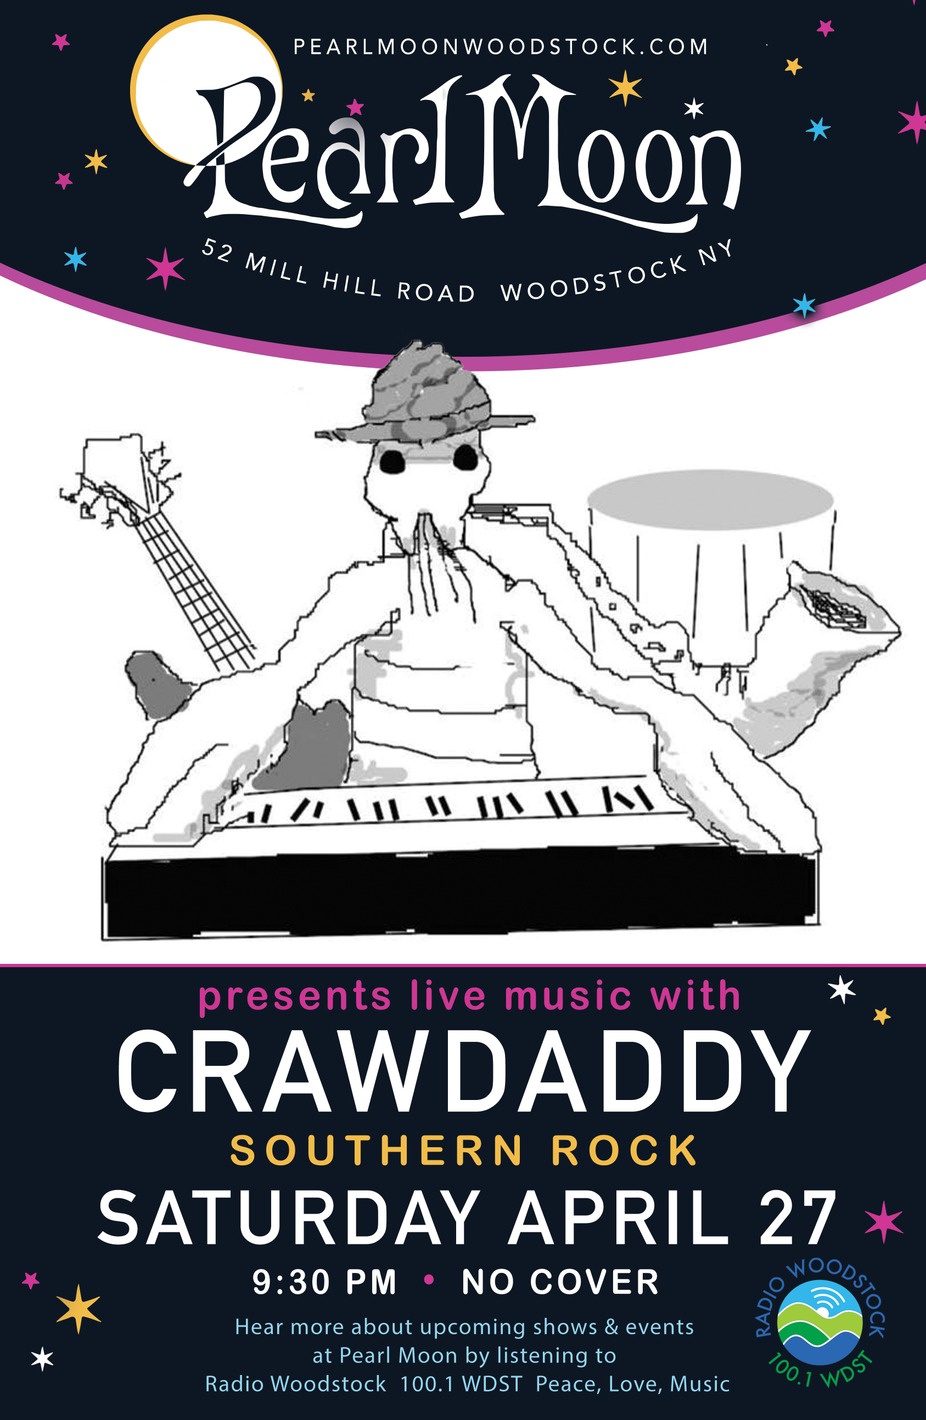 CRAWDADDY at PEARL MOON WOODSTOCK event photo